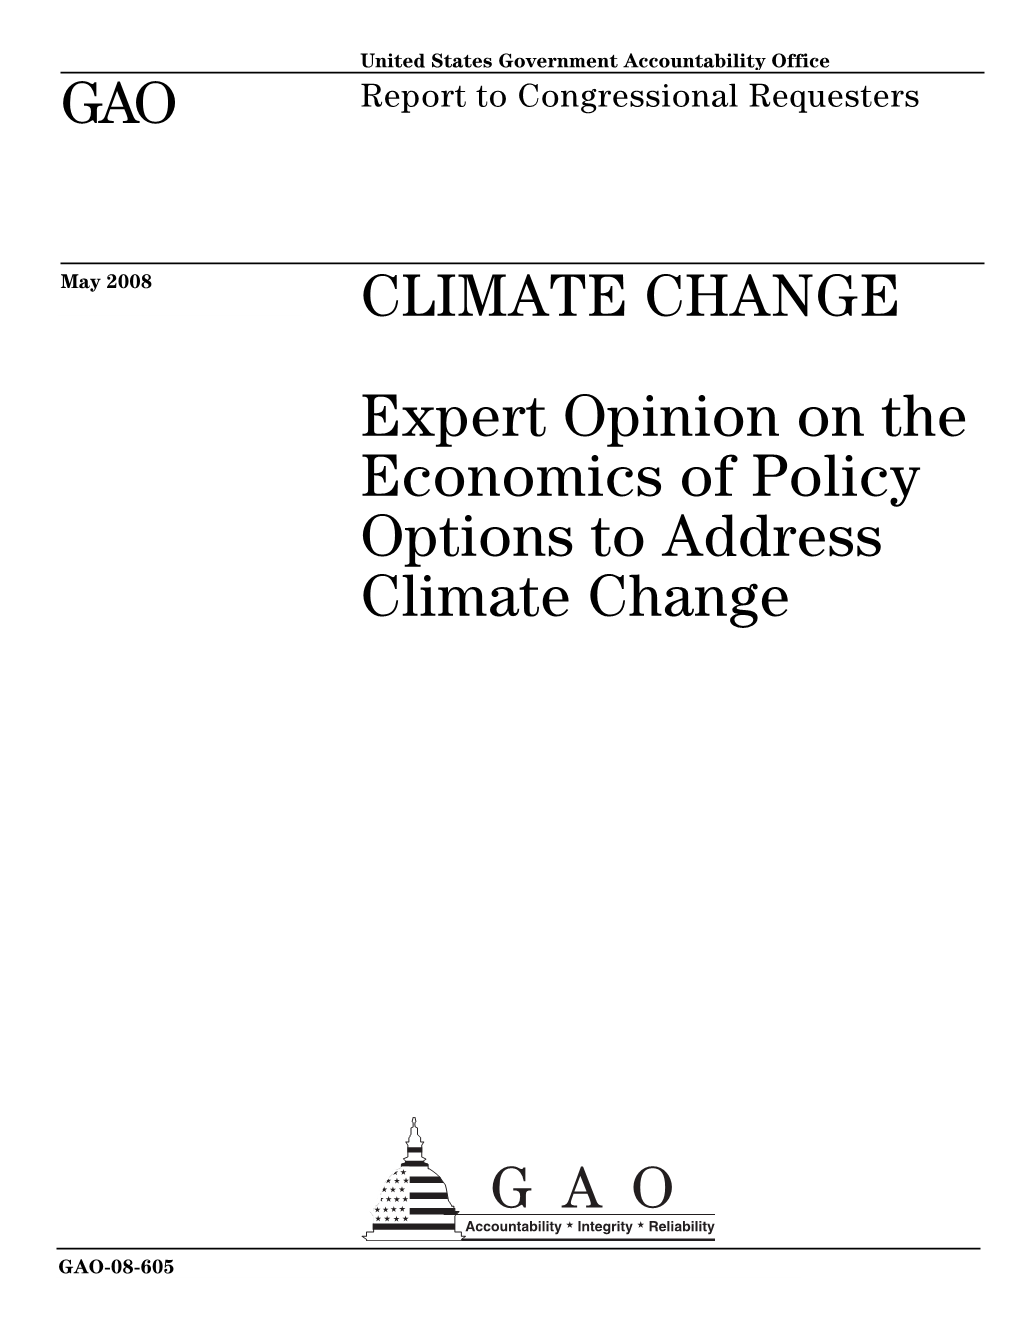 GAO-08-605 Climate Change: Expert Opinion on the Economics of Policy